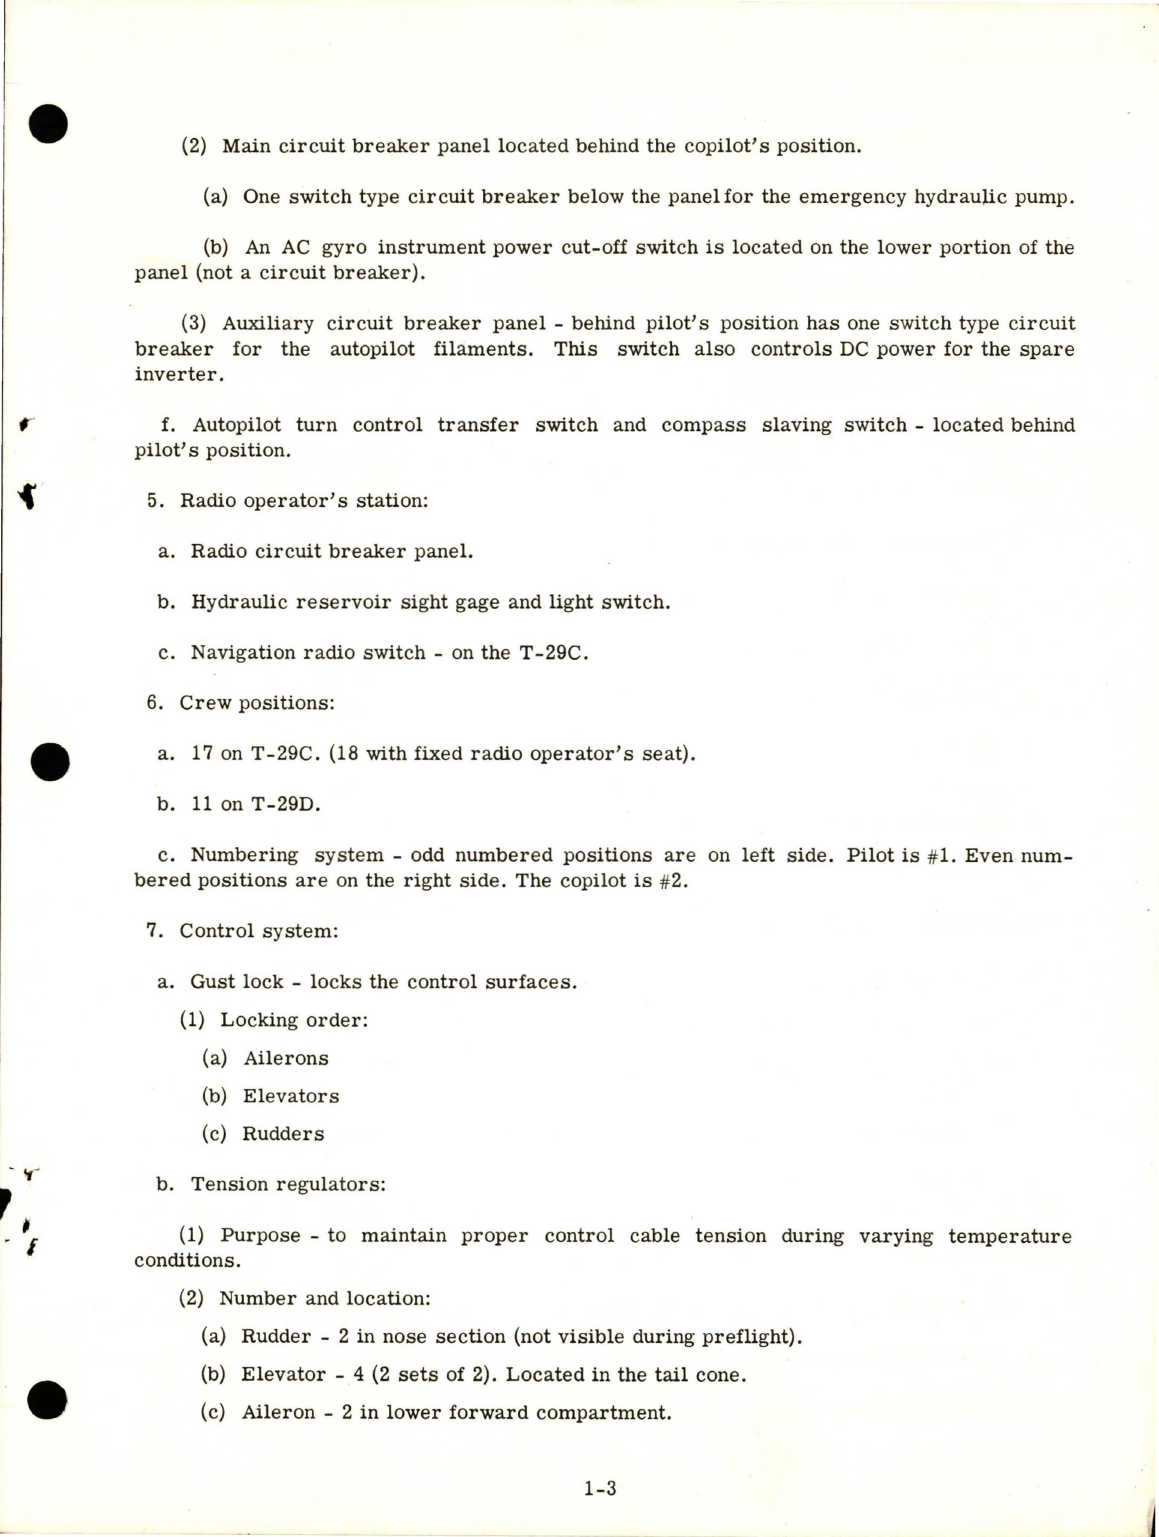 Sample page 7 from AirCorps Library document: Engineering Workbook for Pilots for T-29